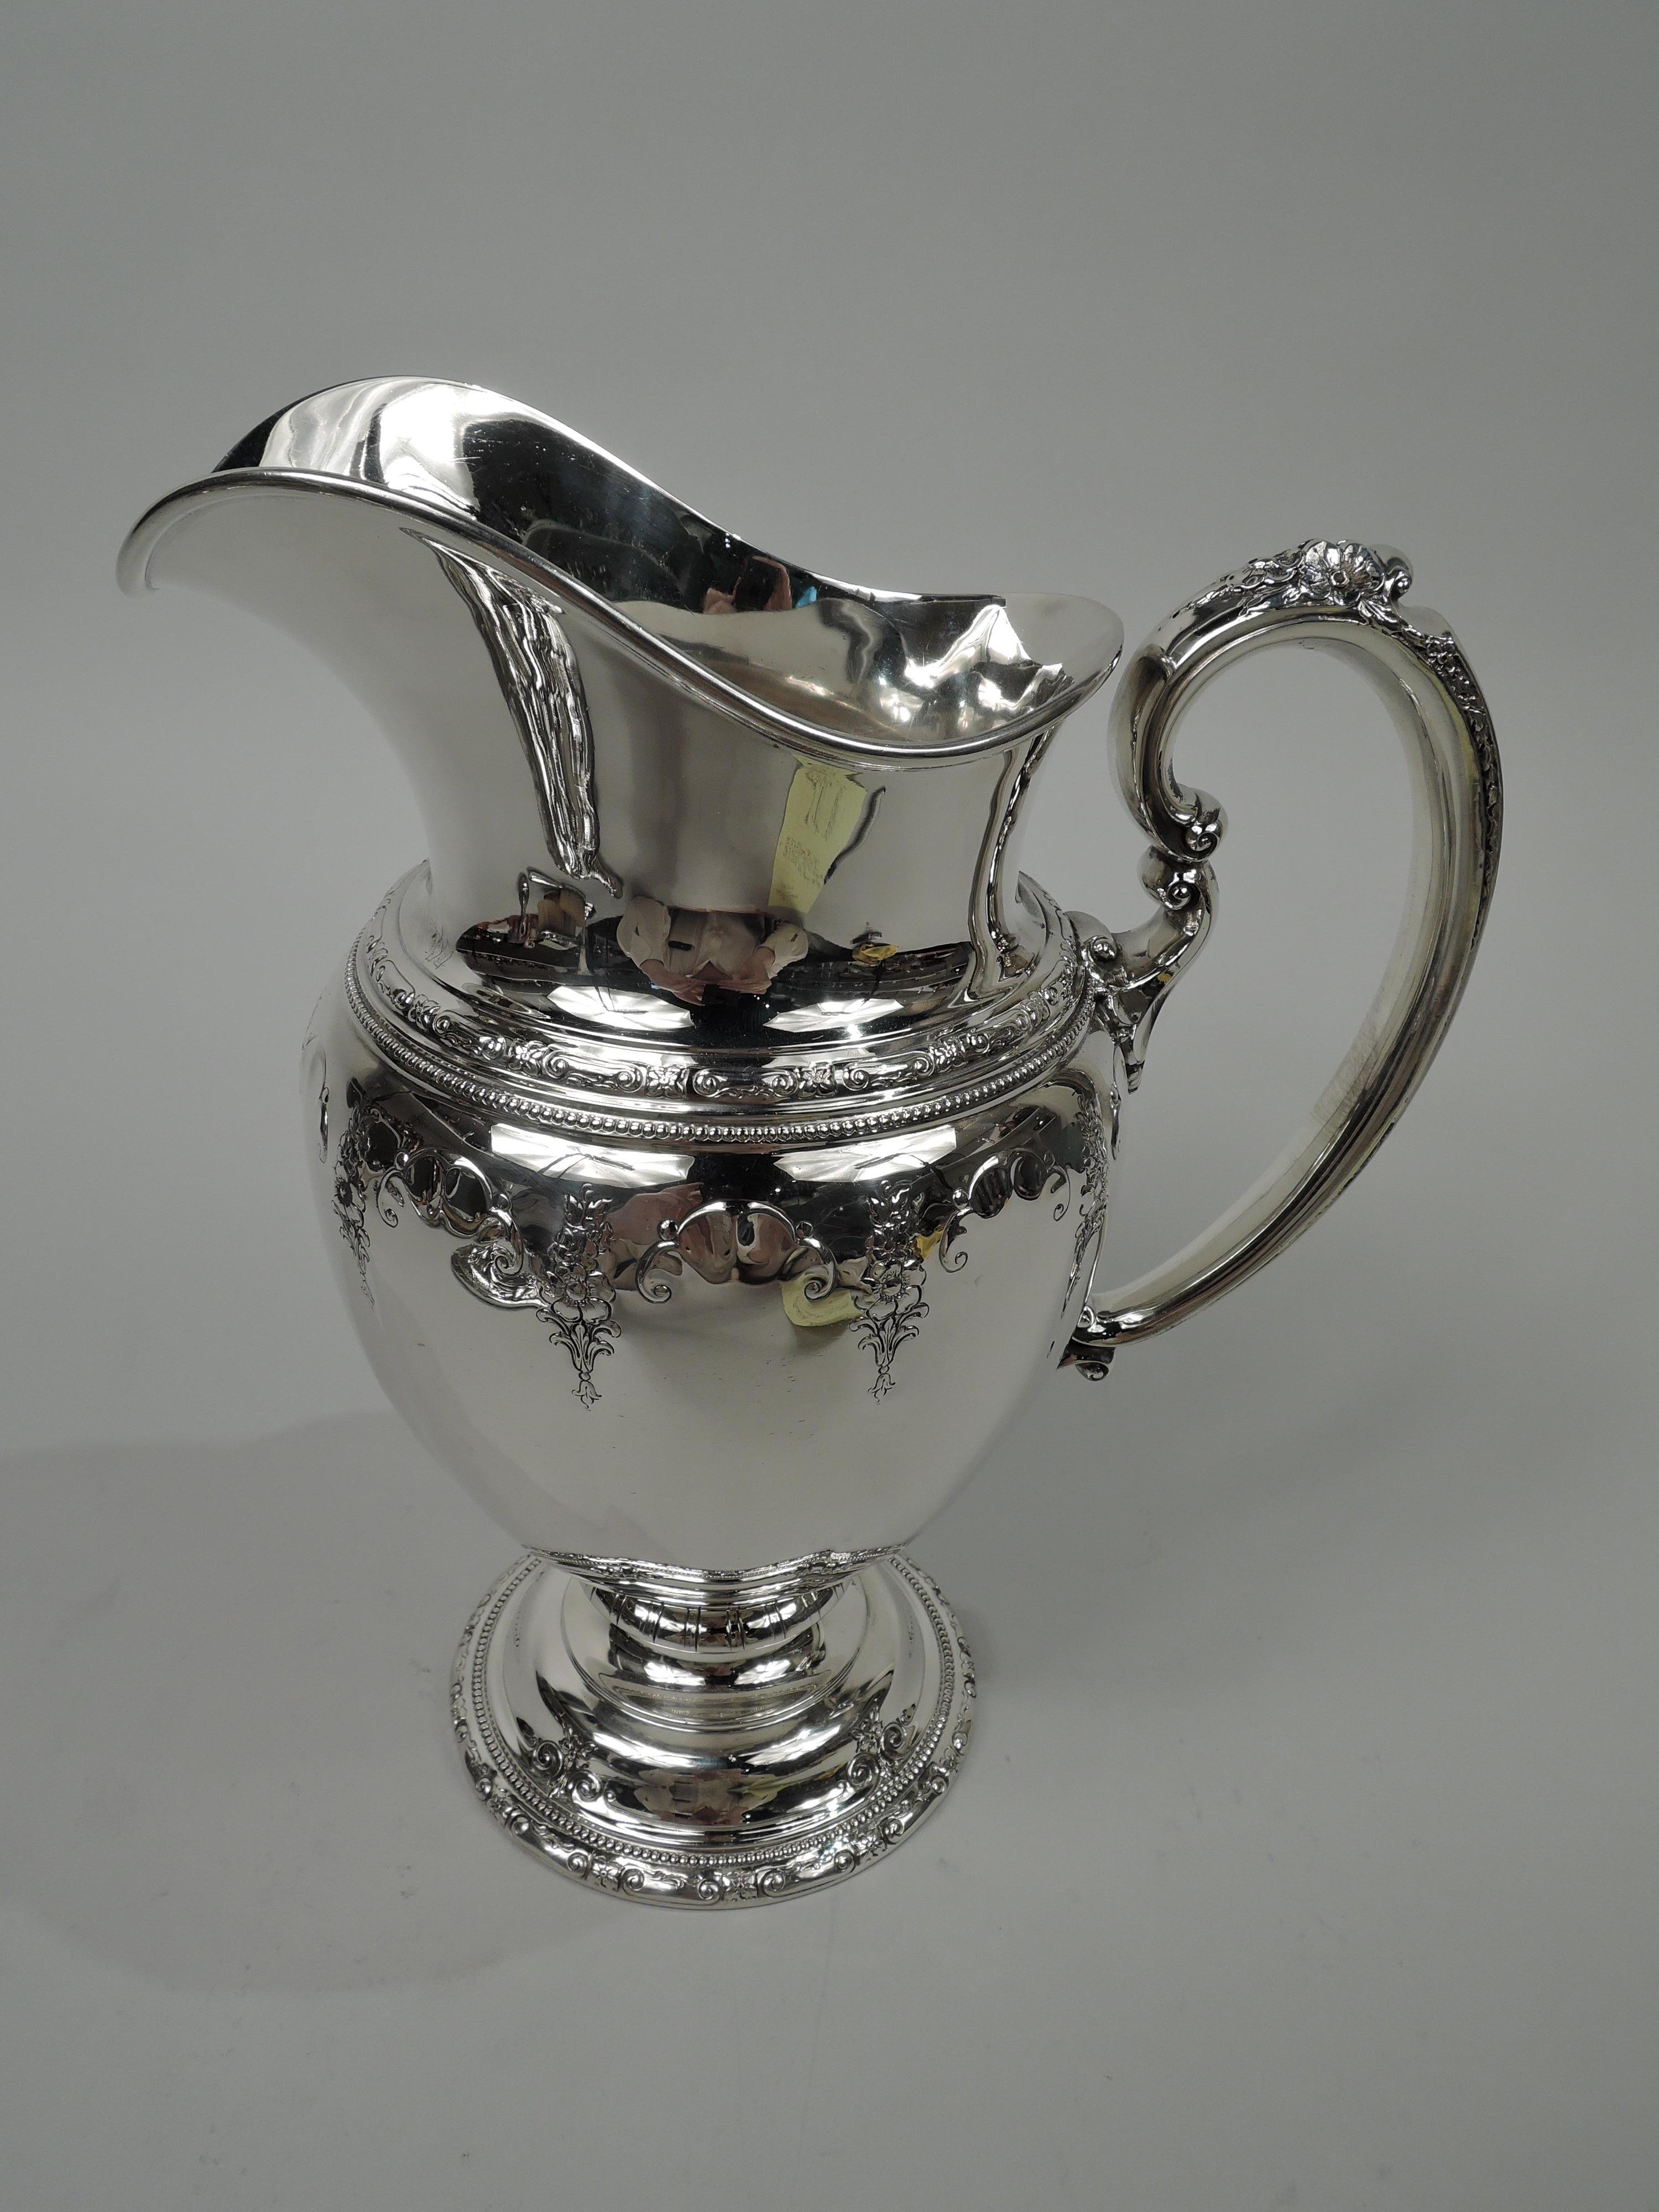 Royal Windsor sterling silver water pitcher. Made by Towle in Newburyport, Mass. Ovoid bowl with helmet mouth, flower-capped double scroll handle, and domed foot. Chased and scalloped frames (vacant) interspersed with pendant flowers. Shoulder and